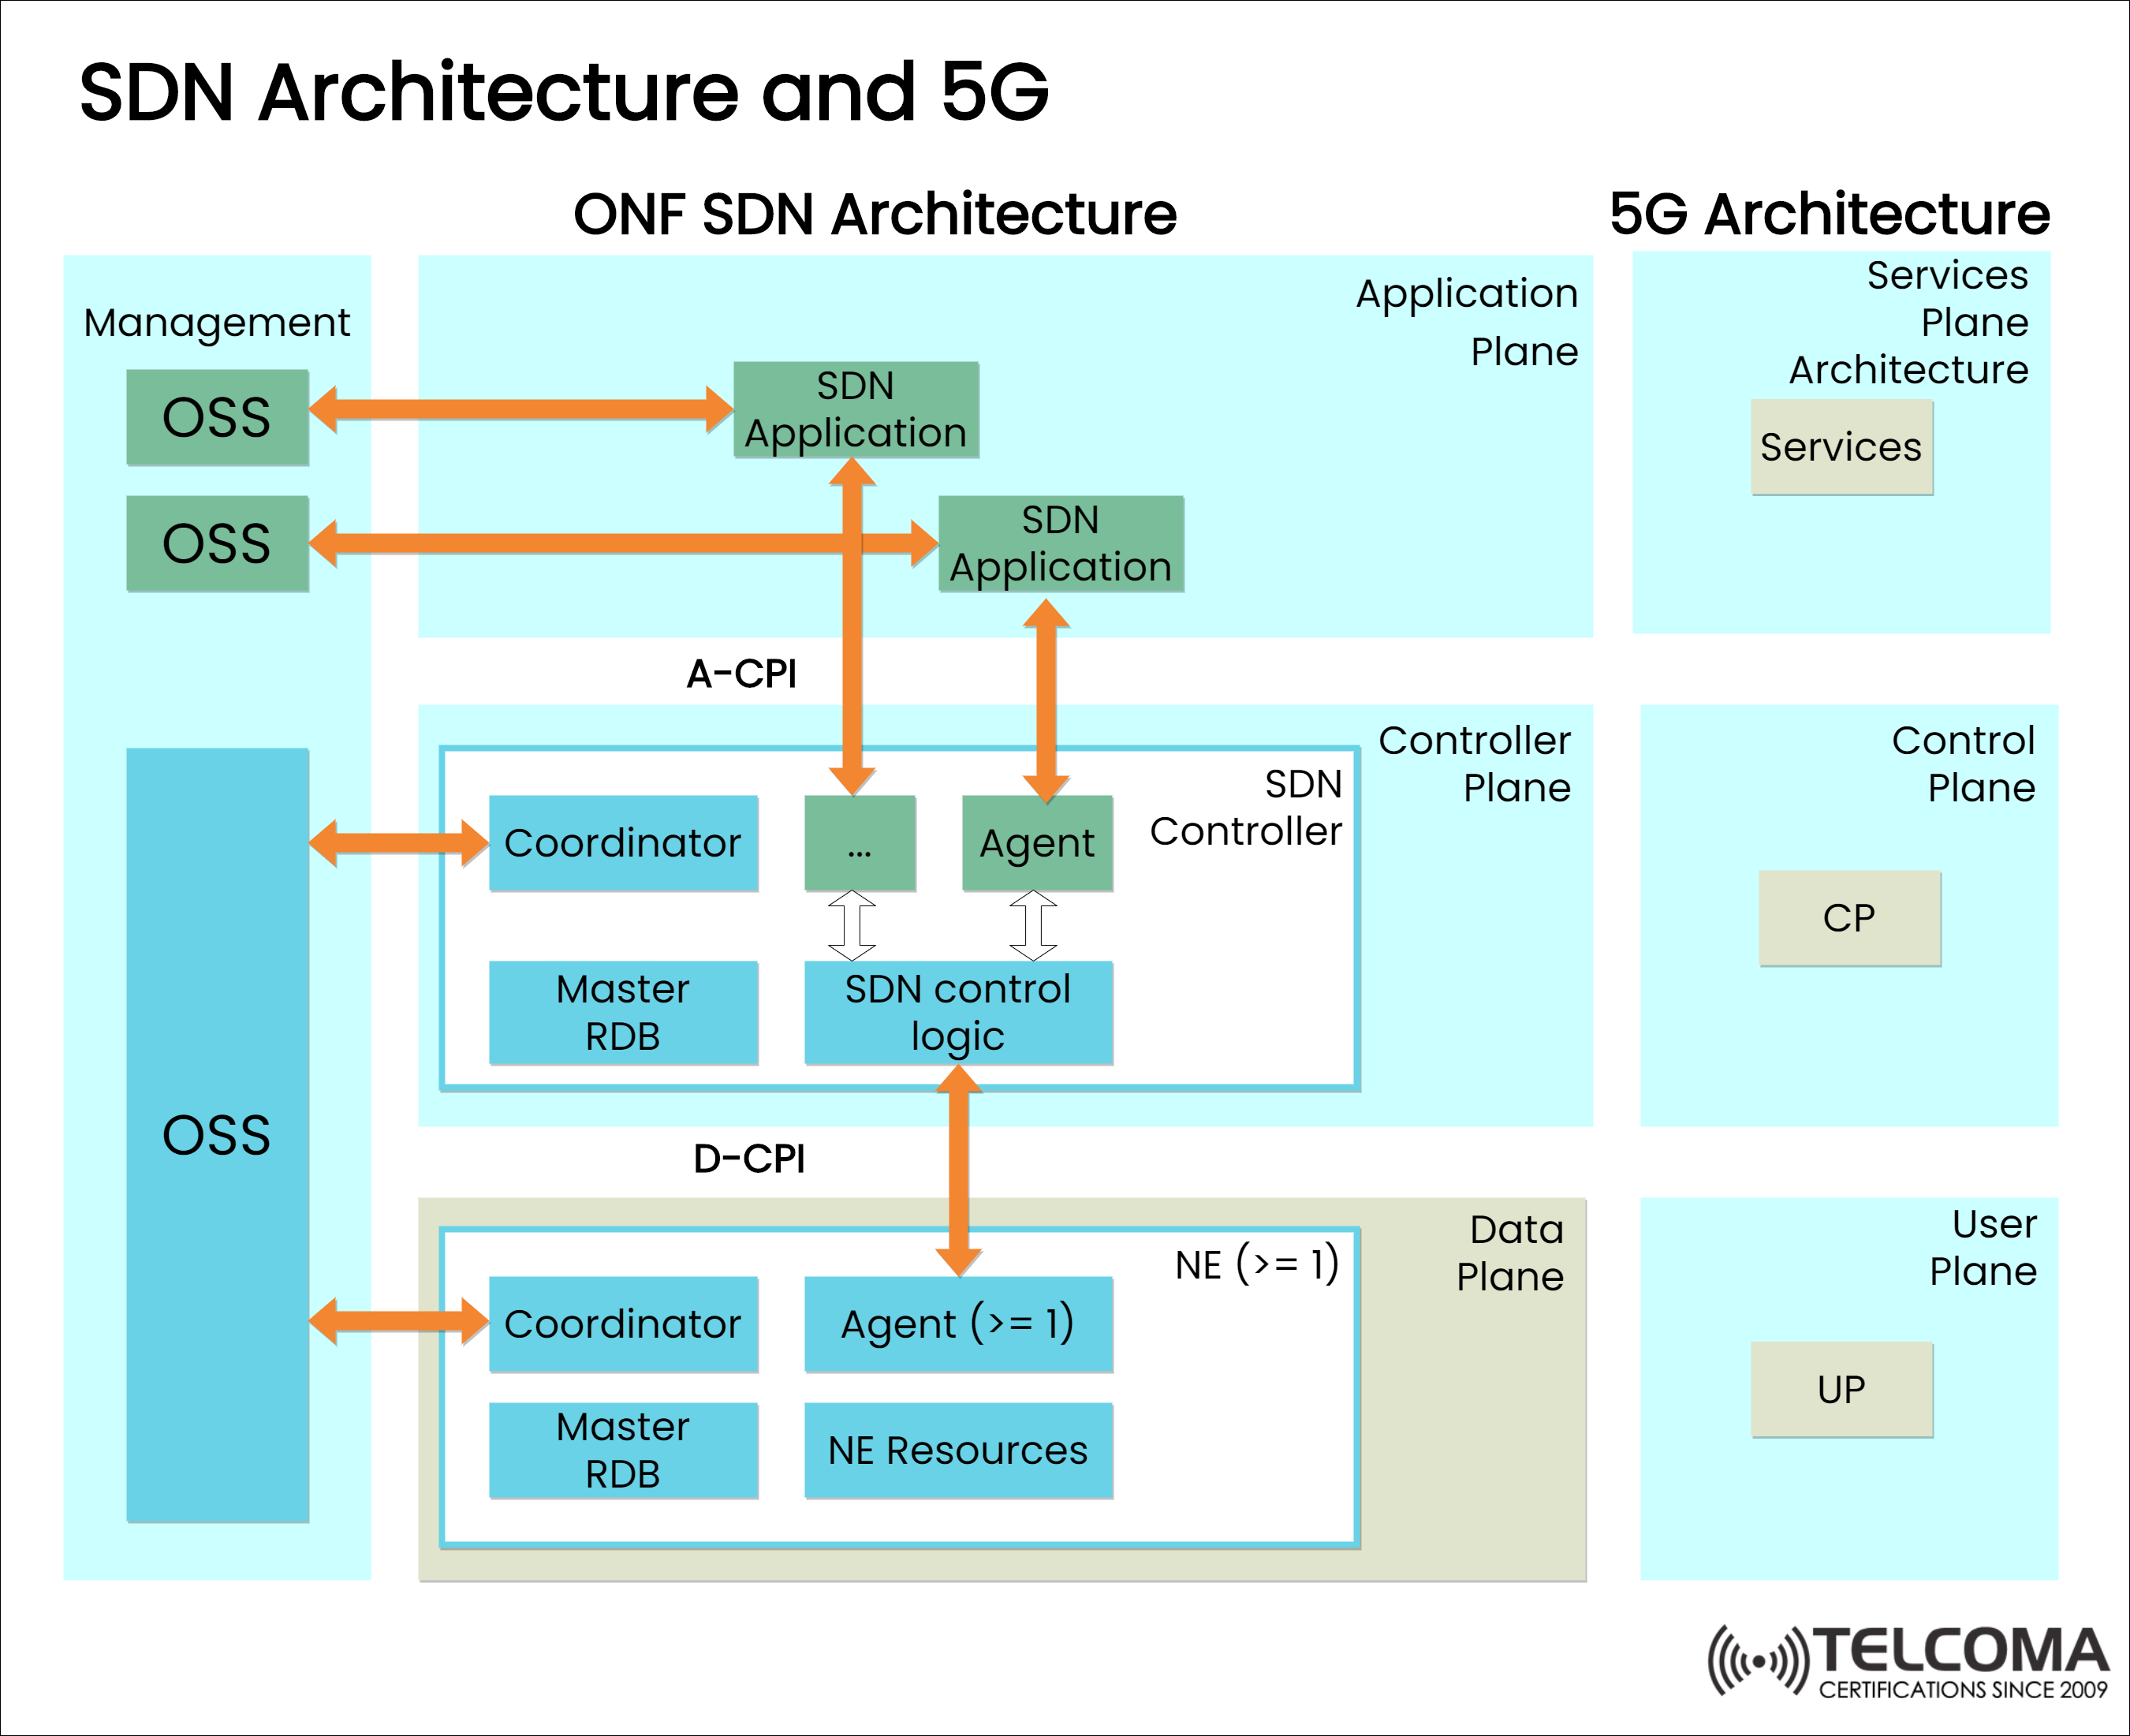 SDN architecture and 5G with ONF